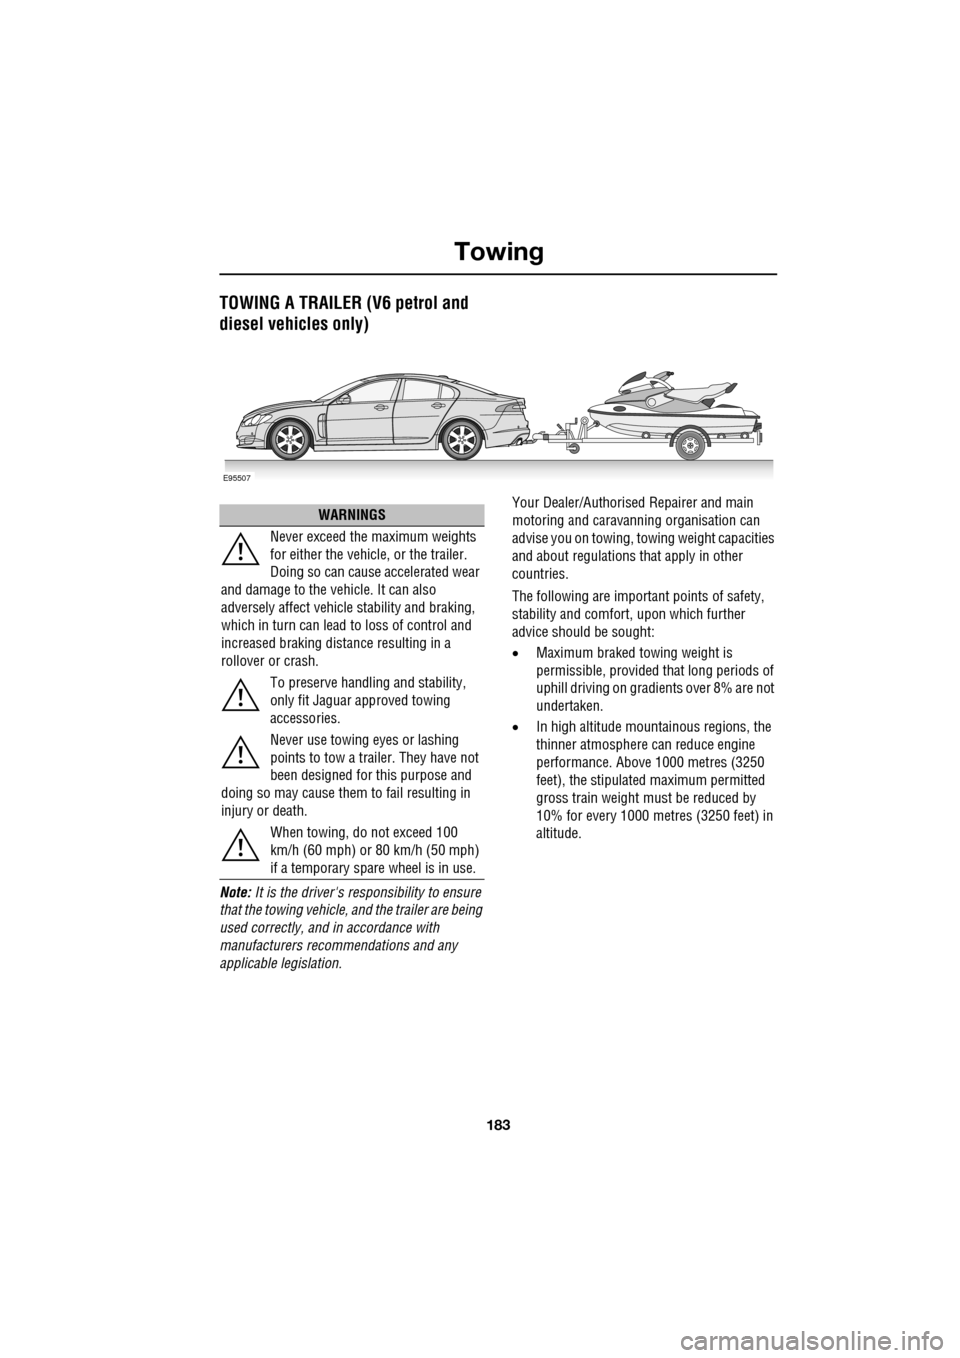 JAGUAR XF 2009 1.G Owners Guide 183
Towing
               
TOWING A TRAILER (V6 petrol and 
diesel vehicles only)
Note: It is the drivers responsibility to ensure 
that the towing vehicle,  and the trailer are being 
used correctly